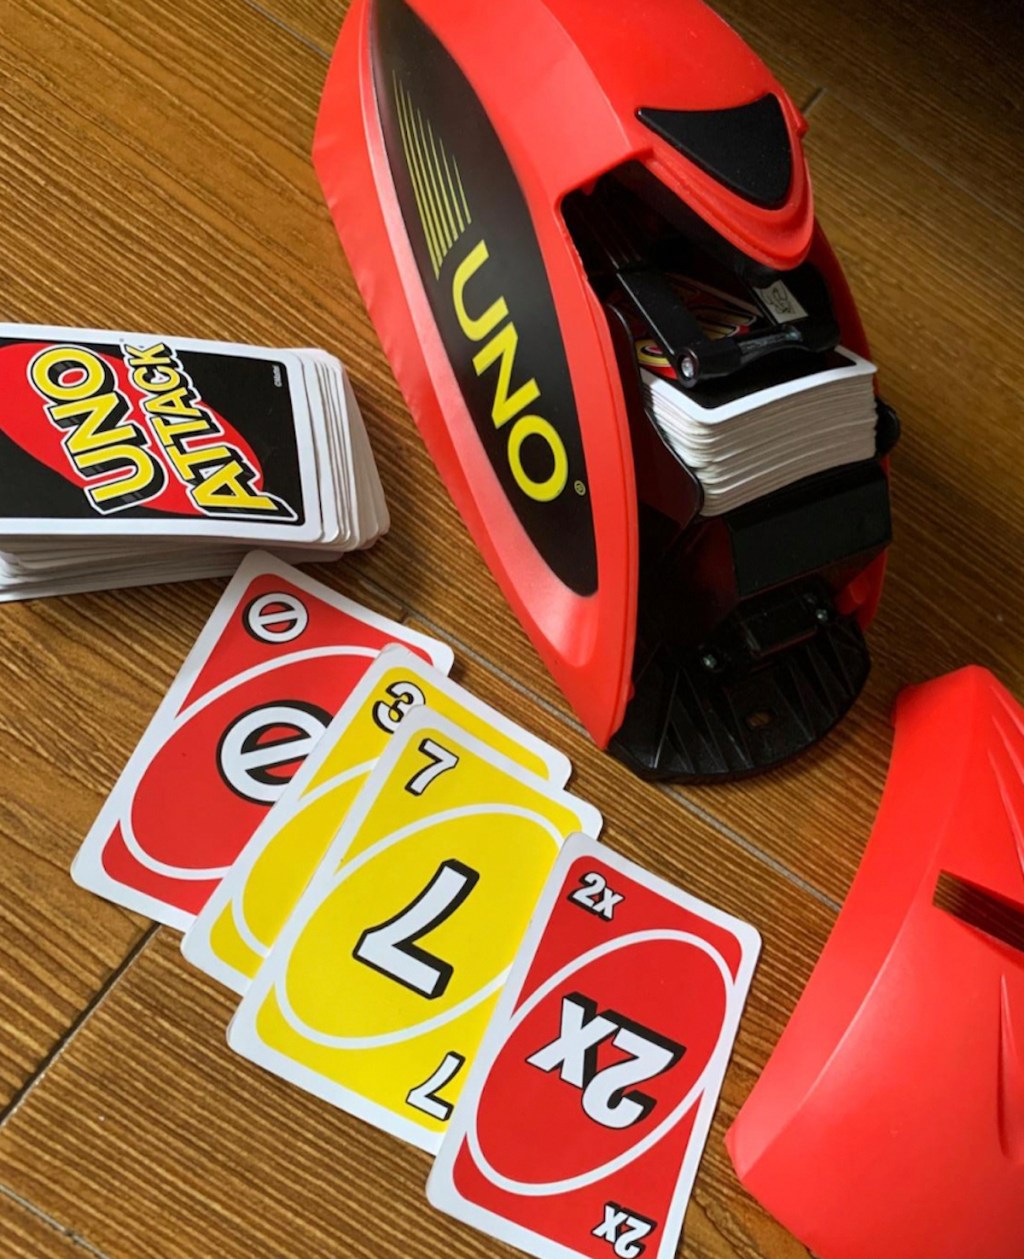 uno attack game on wood table 